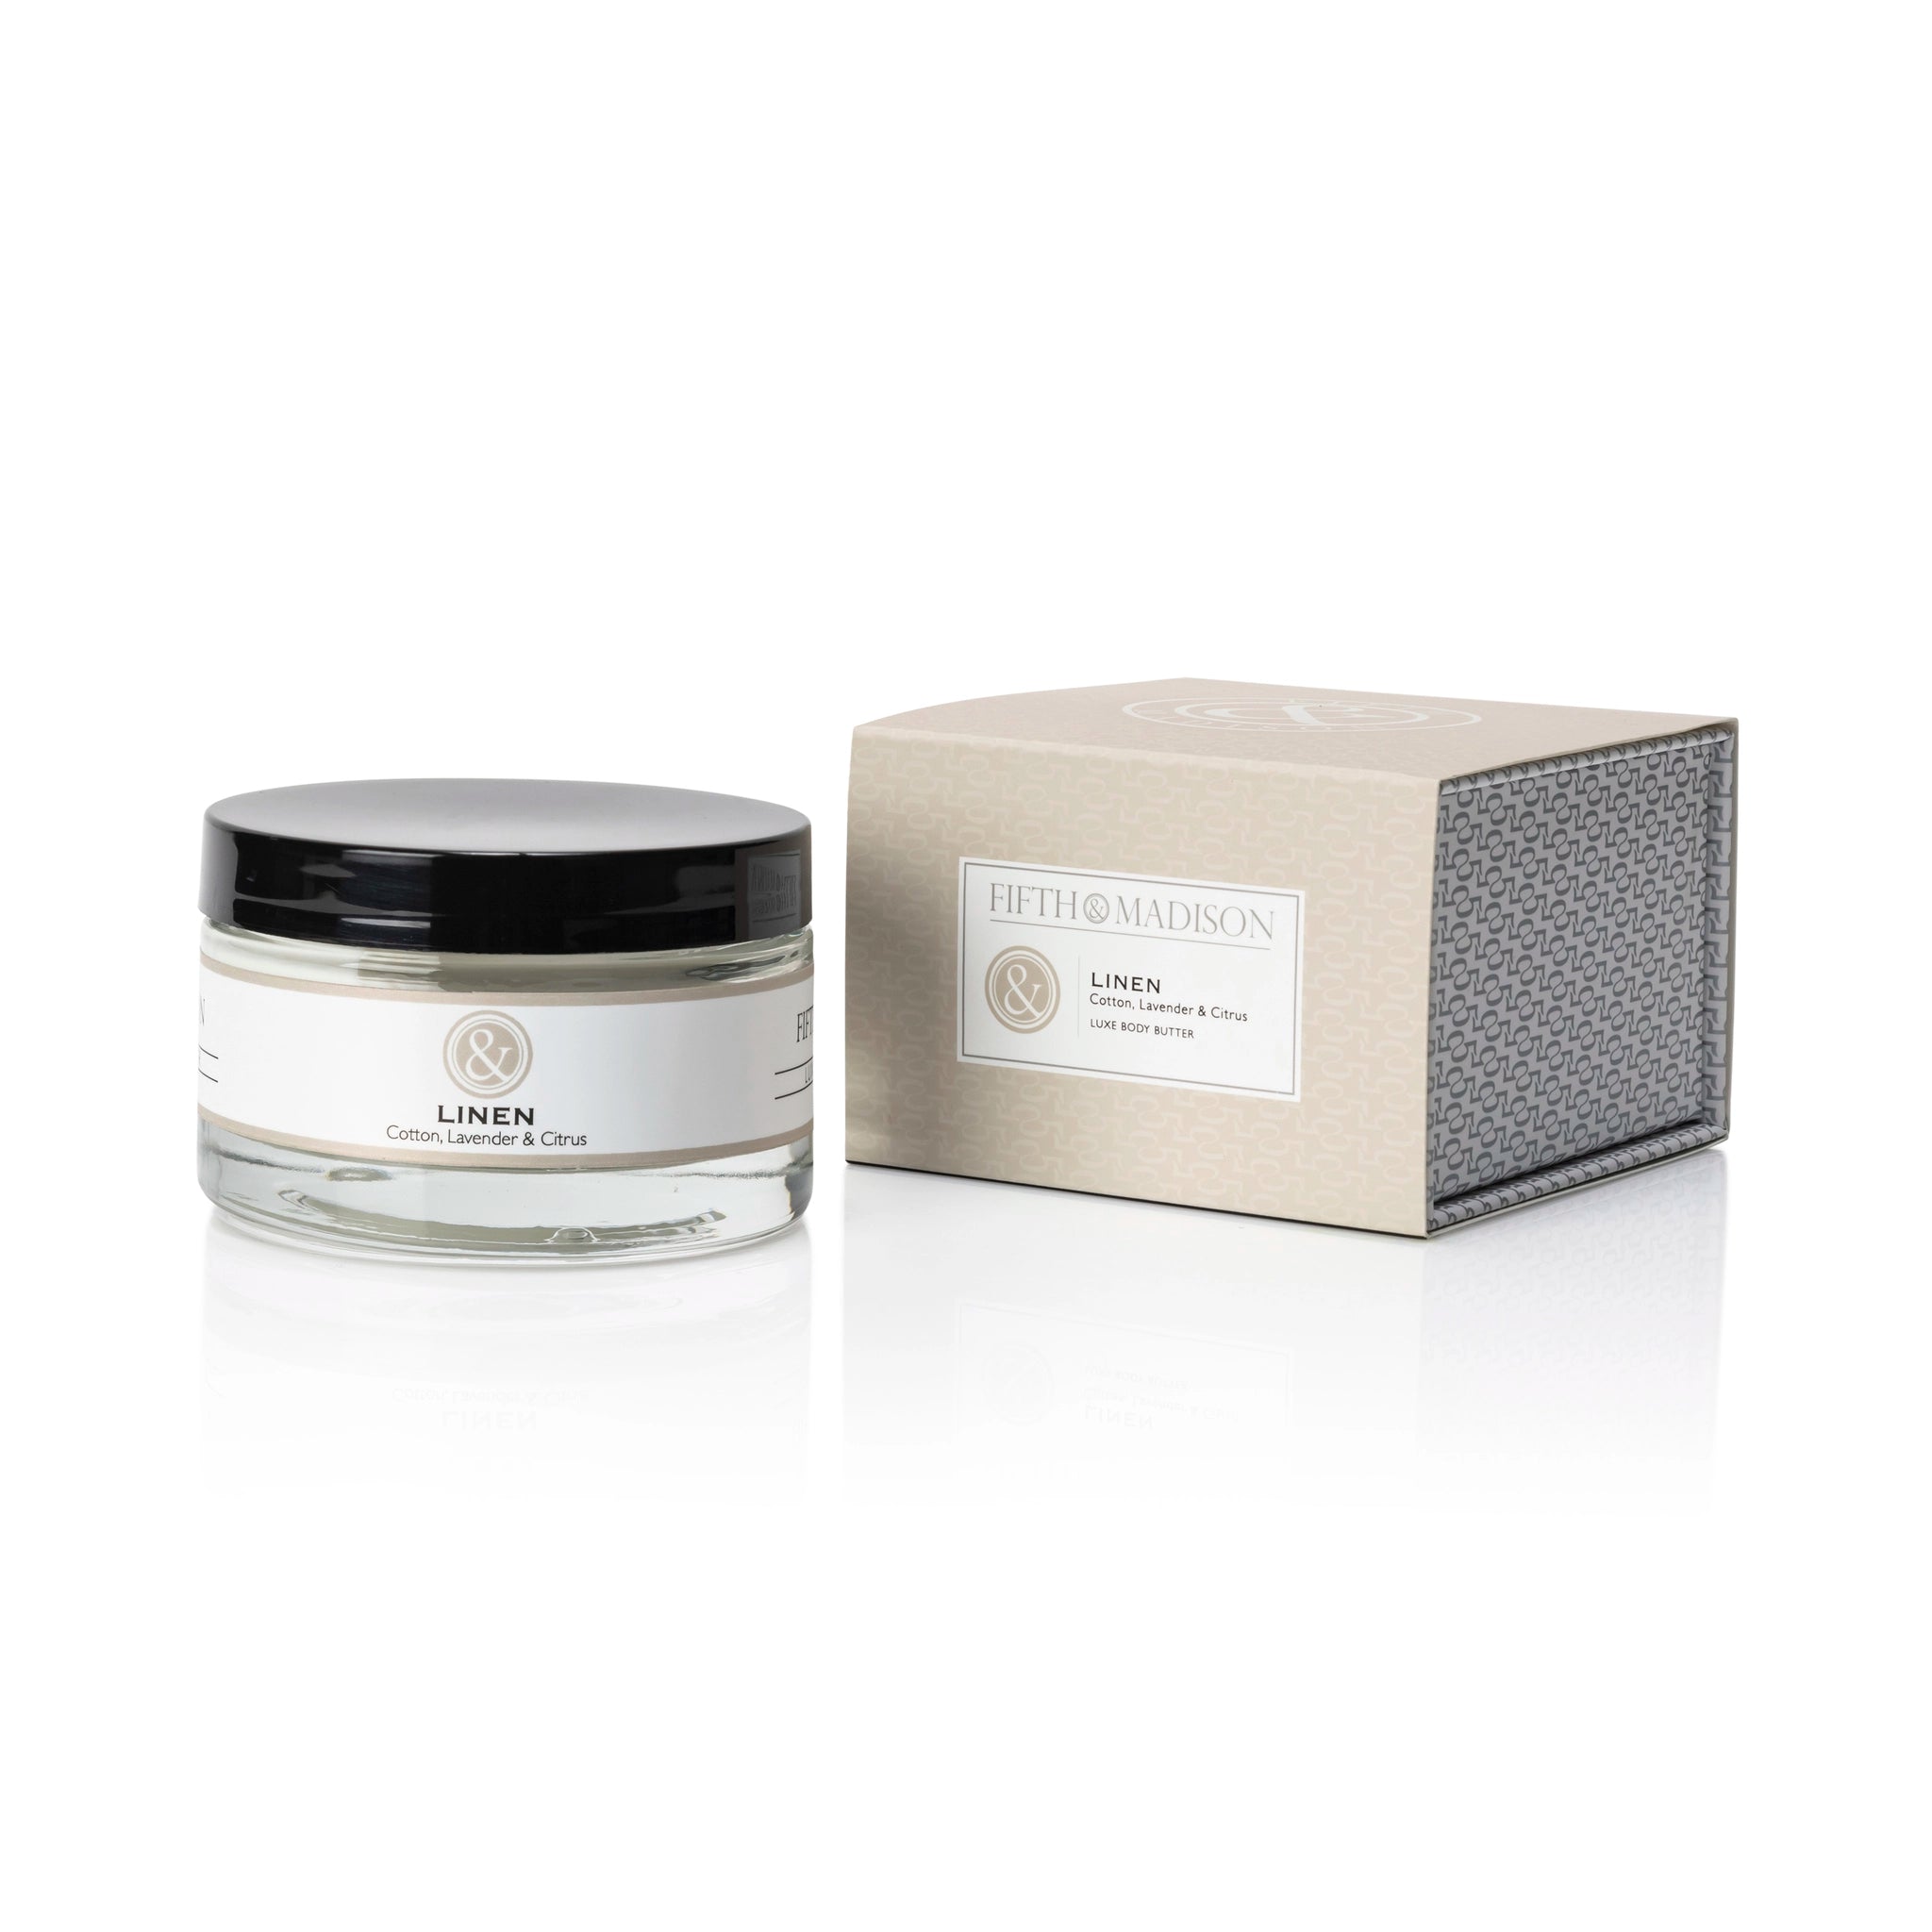 Linen 5th & Madison Luxe Body Butter